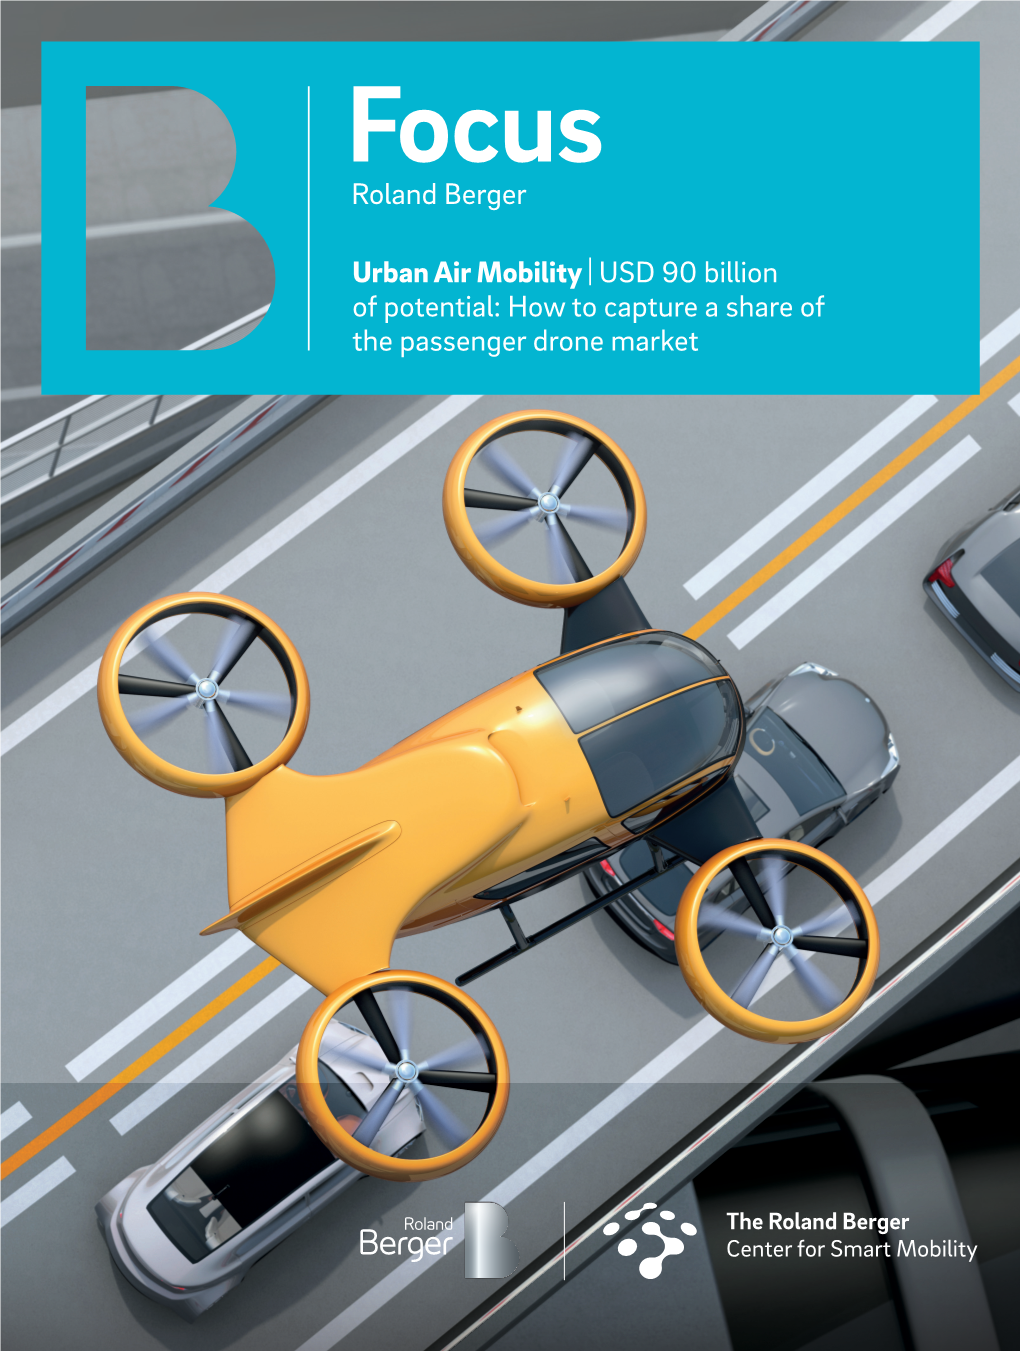 Urban Air Mobility | USD 90 Billion of Potential: How to Capture a Share of the Passenger Drone Market